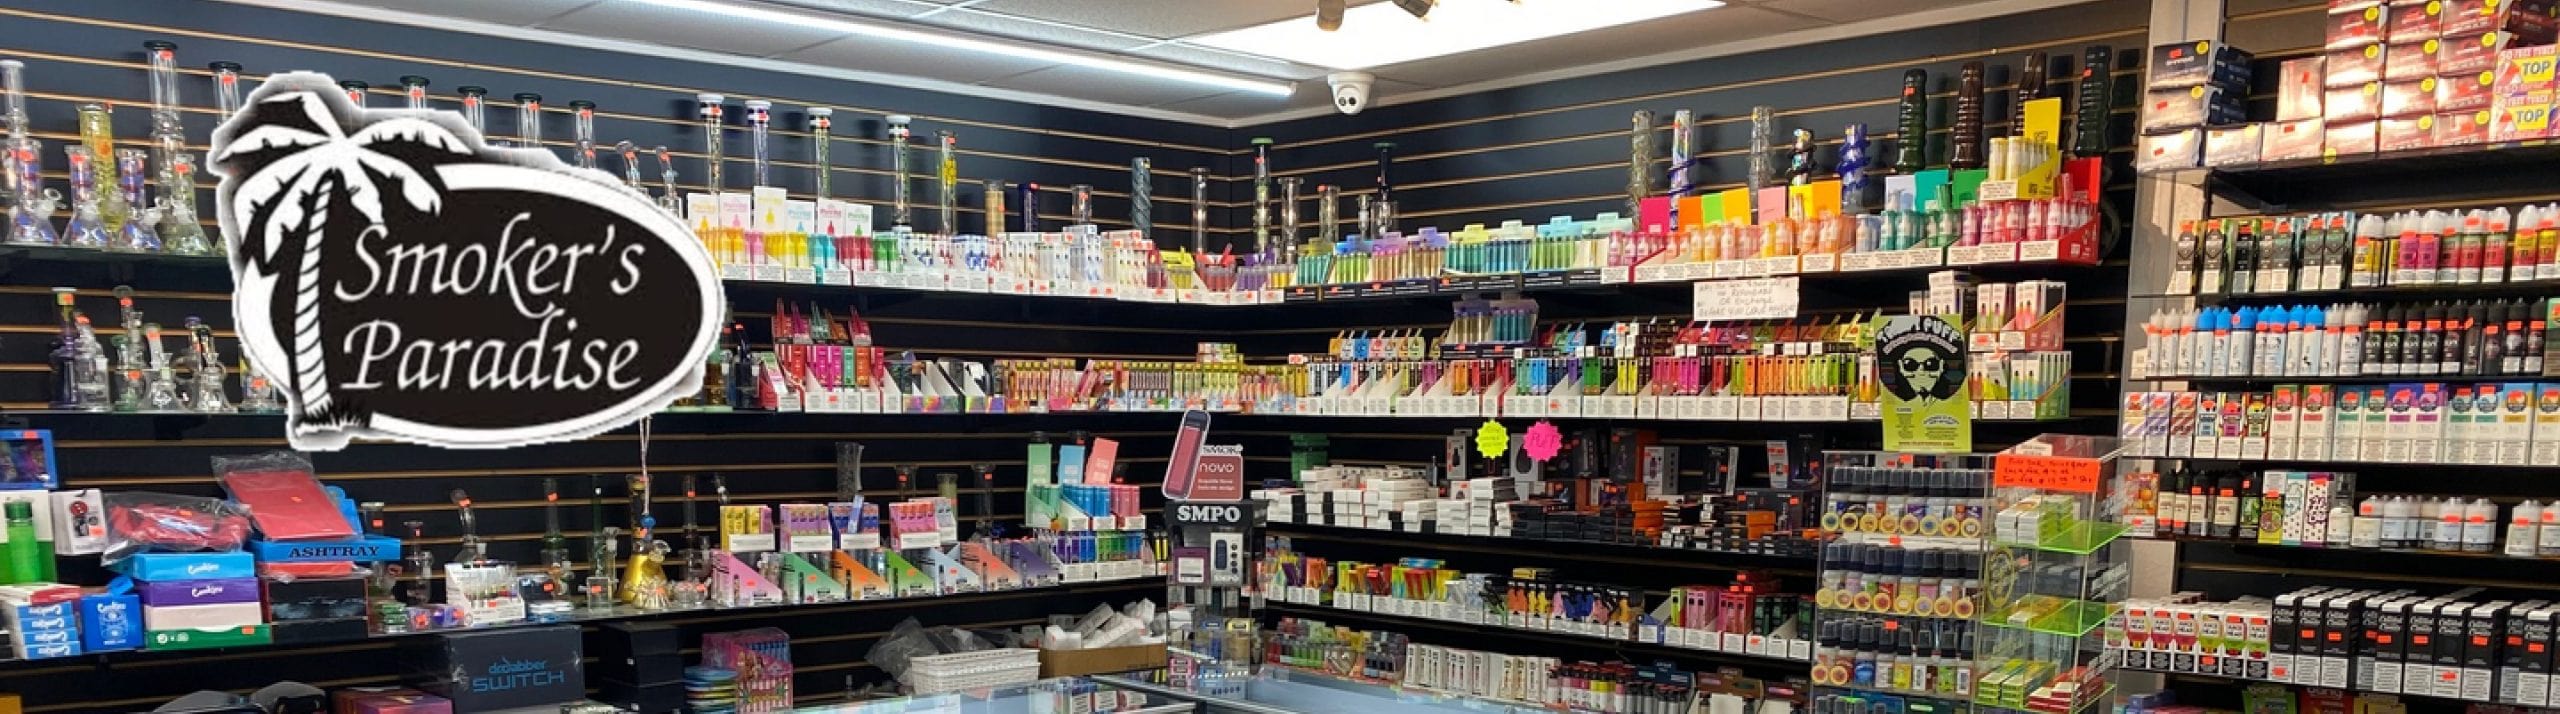 image of smokers paradise in frederick md